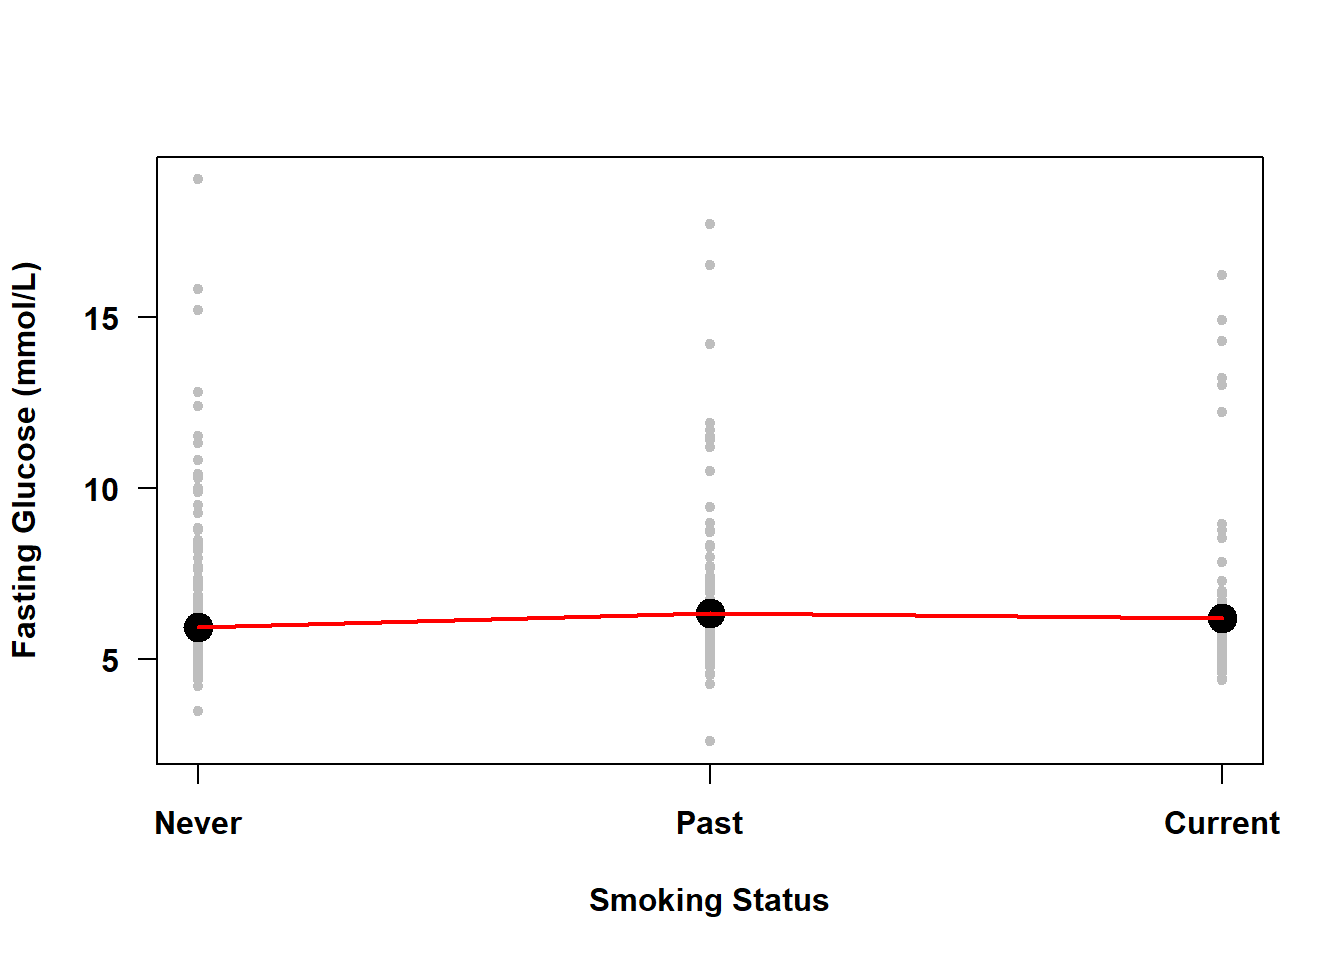 Simple linear regression of fasting glucose on smoking status